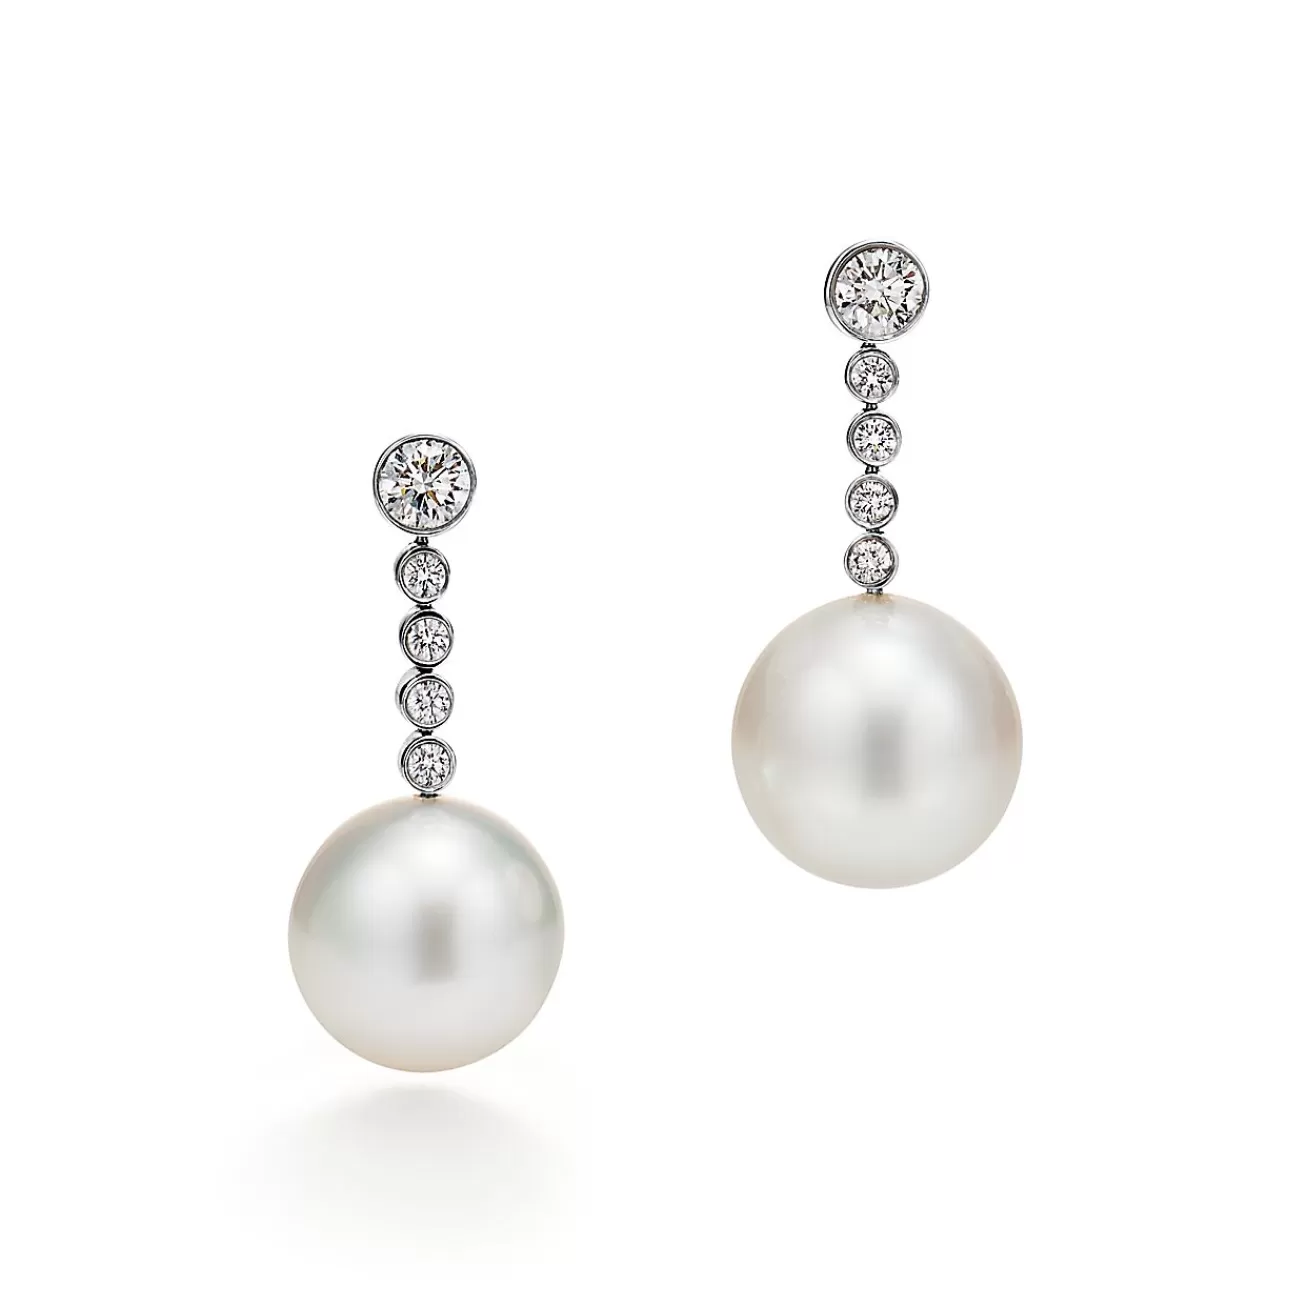 Tiffany & Co. Tiffany Jazz™ earrings in platinum with South Sea cultured pearls and diamonds. | ^ Earrings | Platinum Jewelry